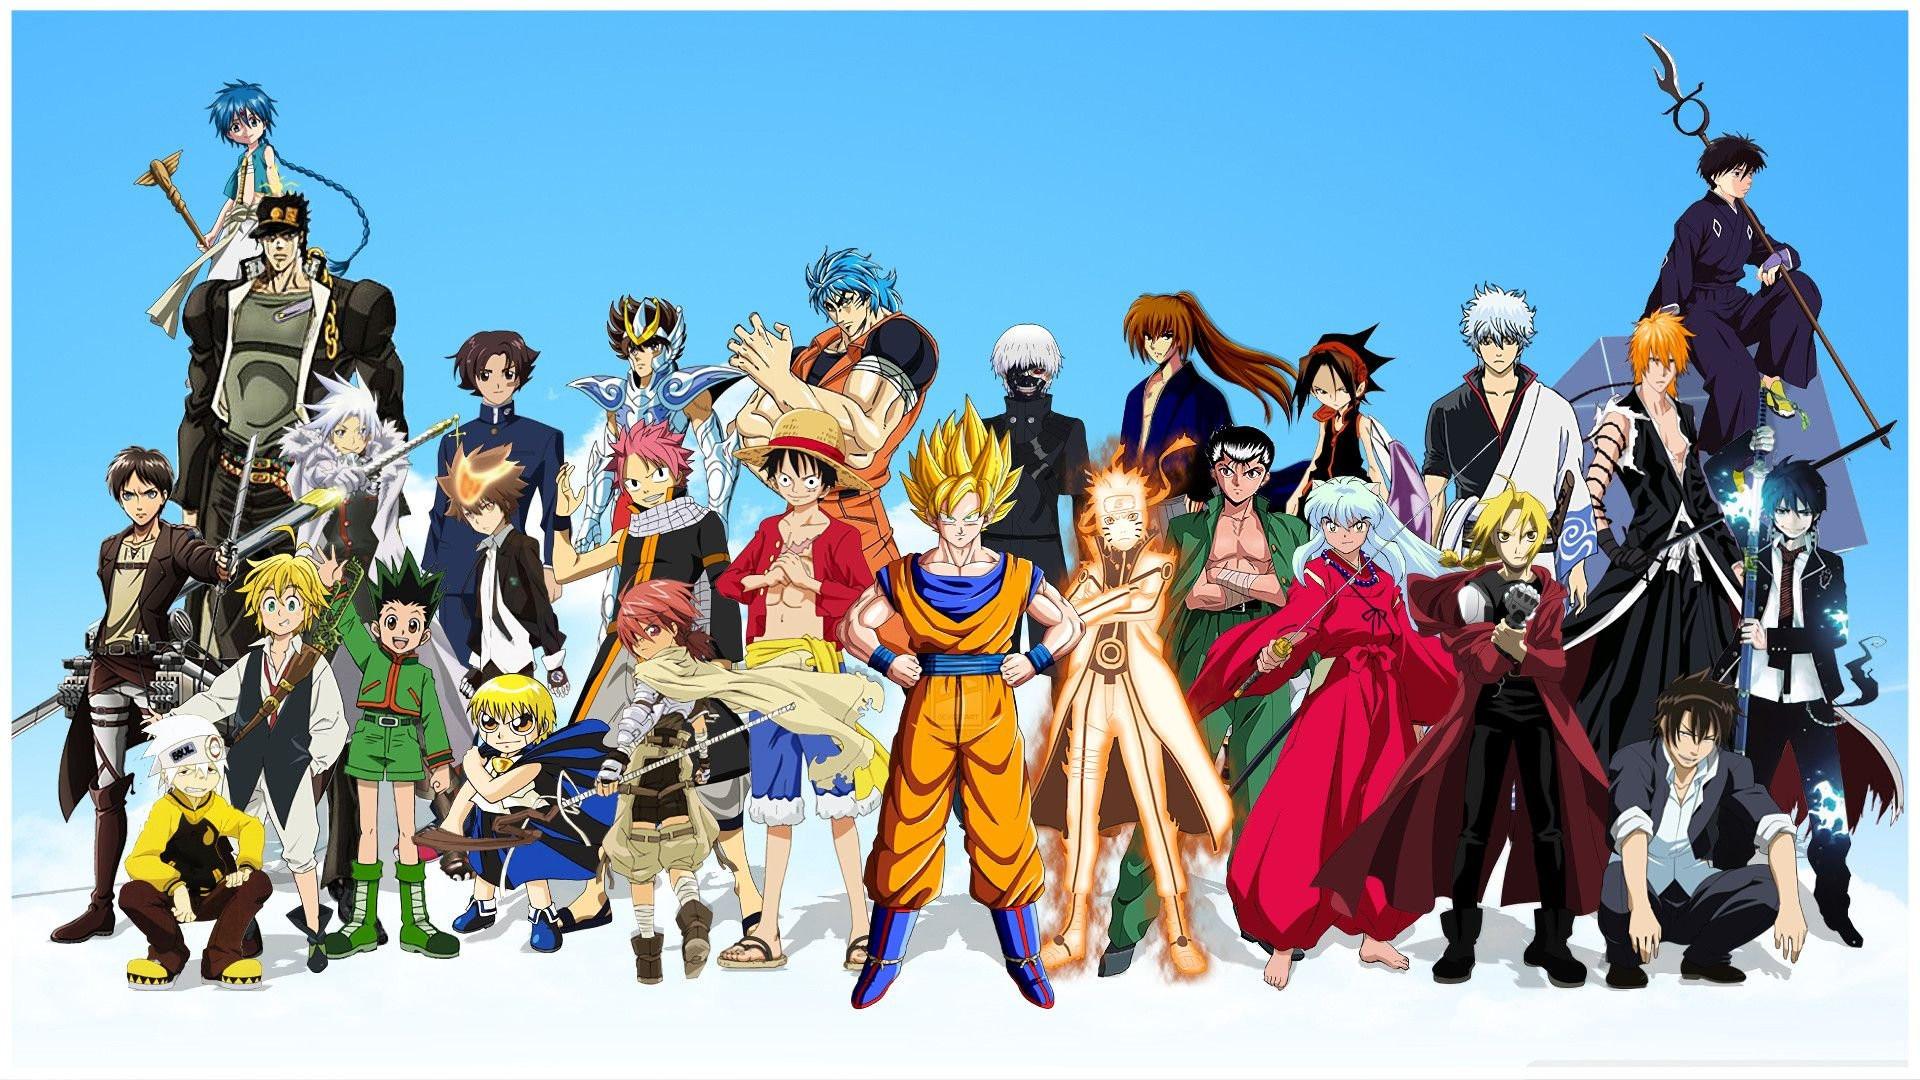 Share more than 71 anime characters together best  induhocakina